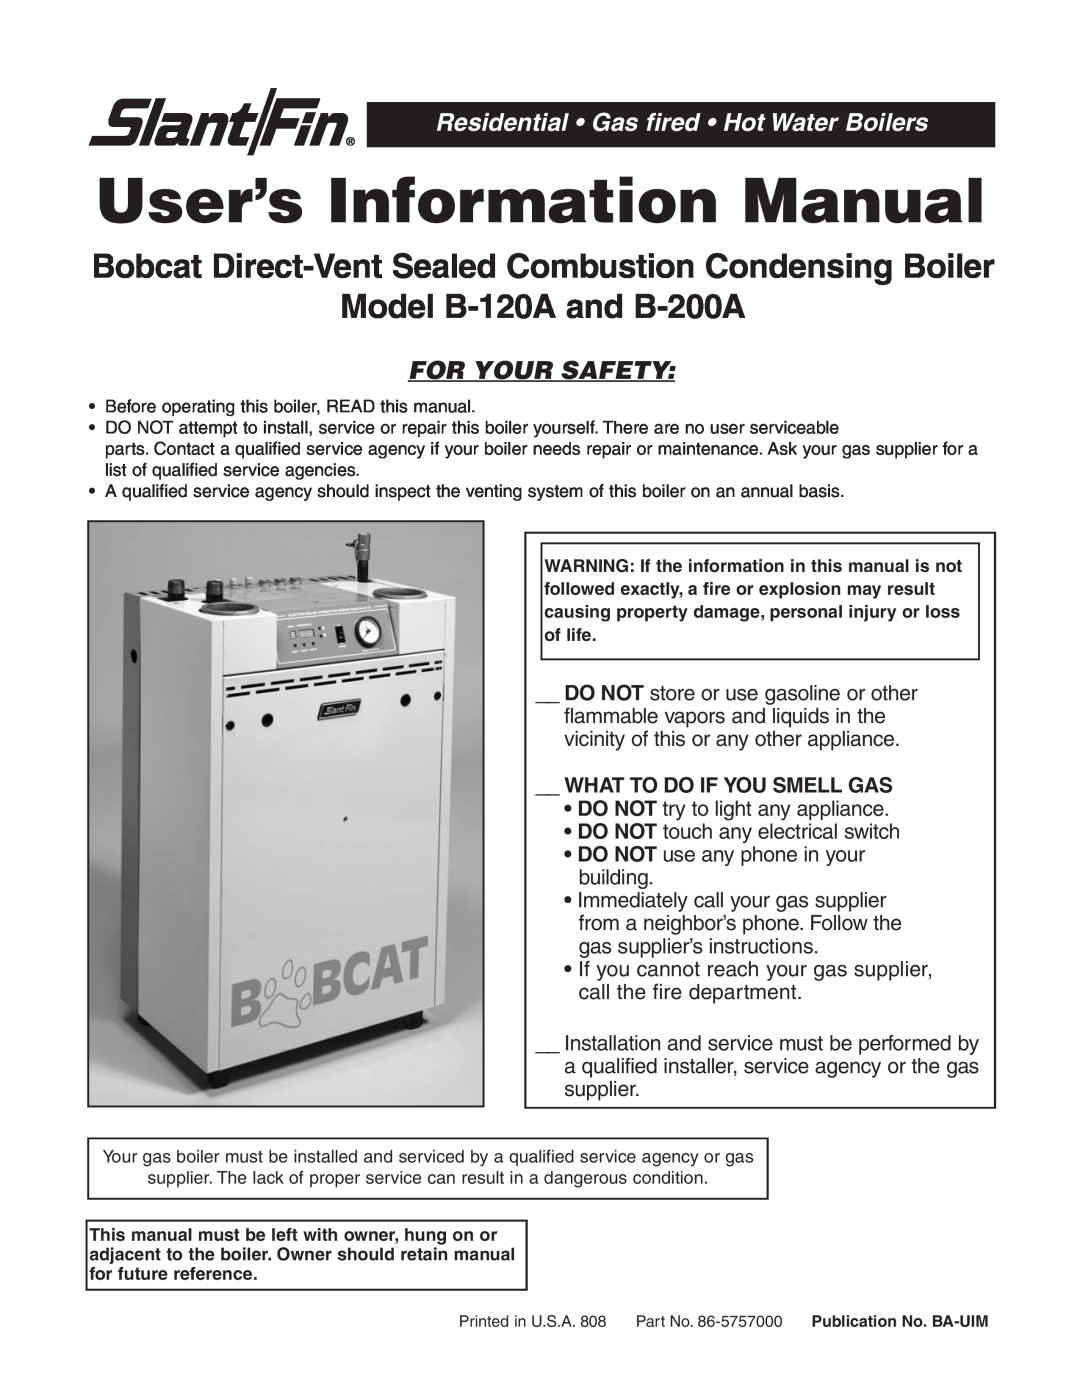 Slant/Fin user service User’s Information Manual, Model B-120Aand B-200A, Residential Gas fired Hot Water Boilers 